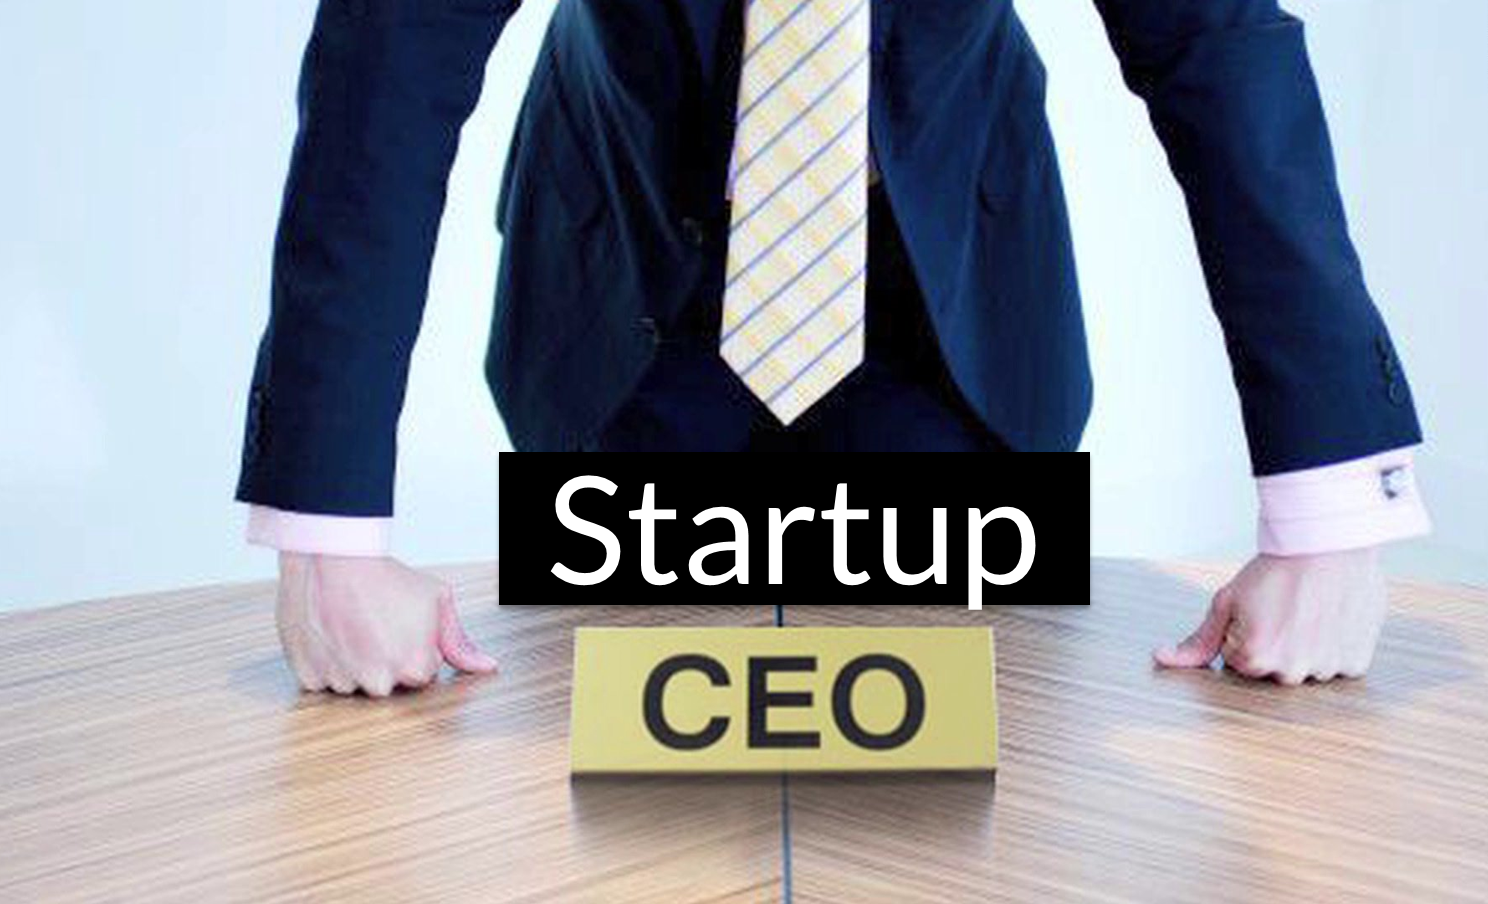 CEO Startup